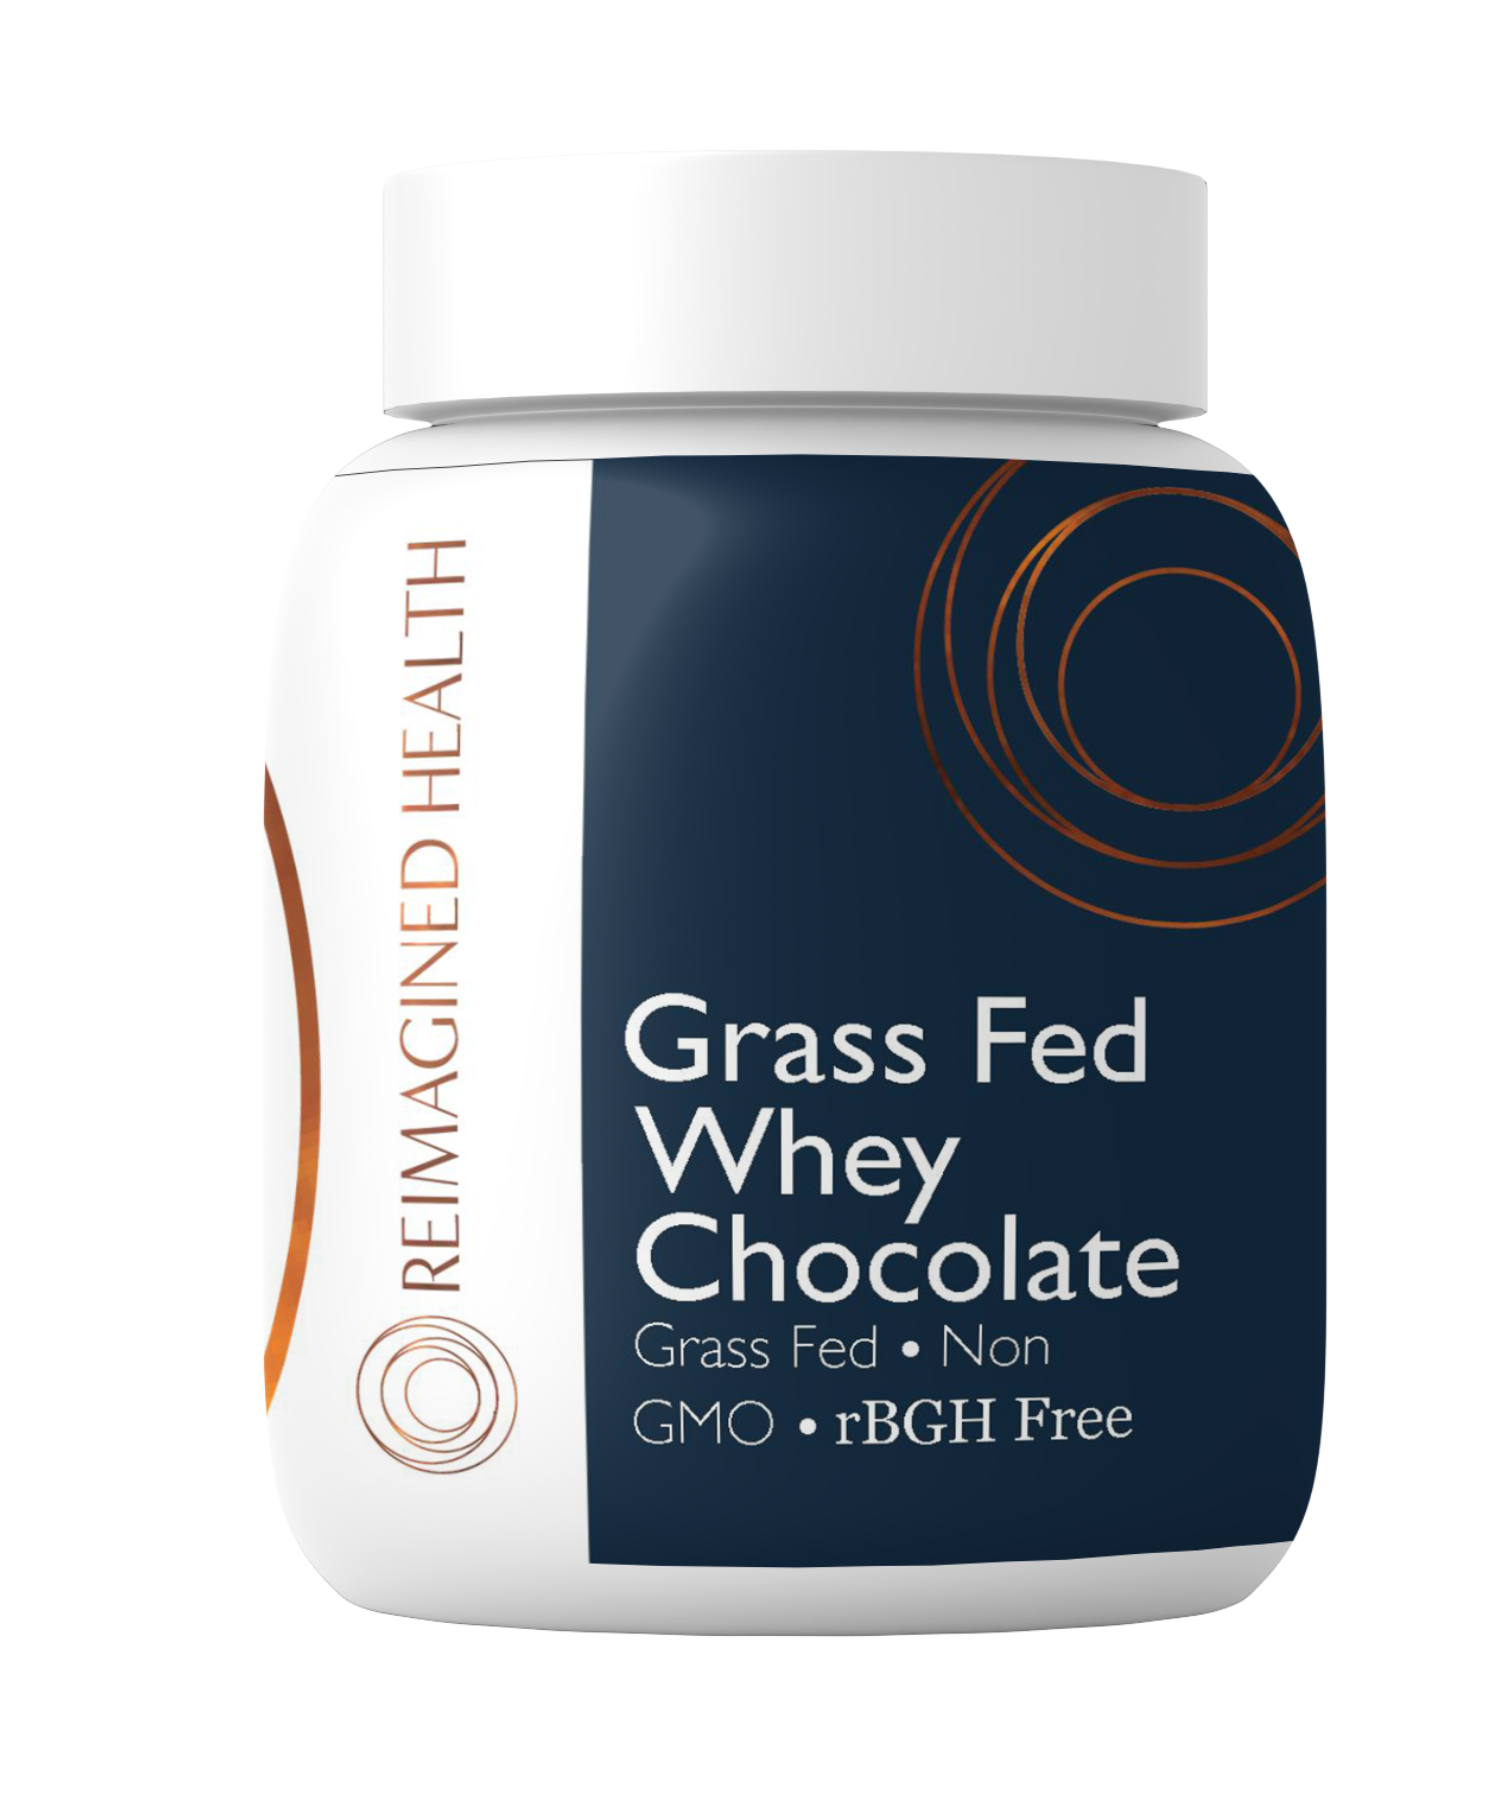 Grass-Fed-Whey-Chocolate-A755-1-1.png